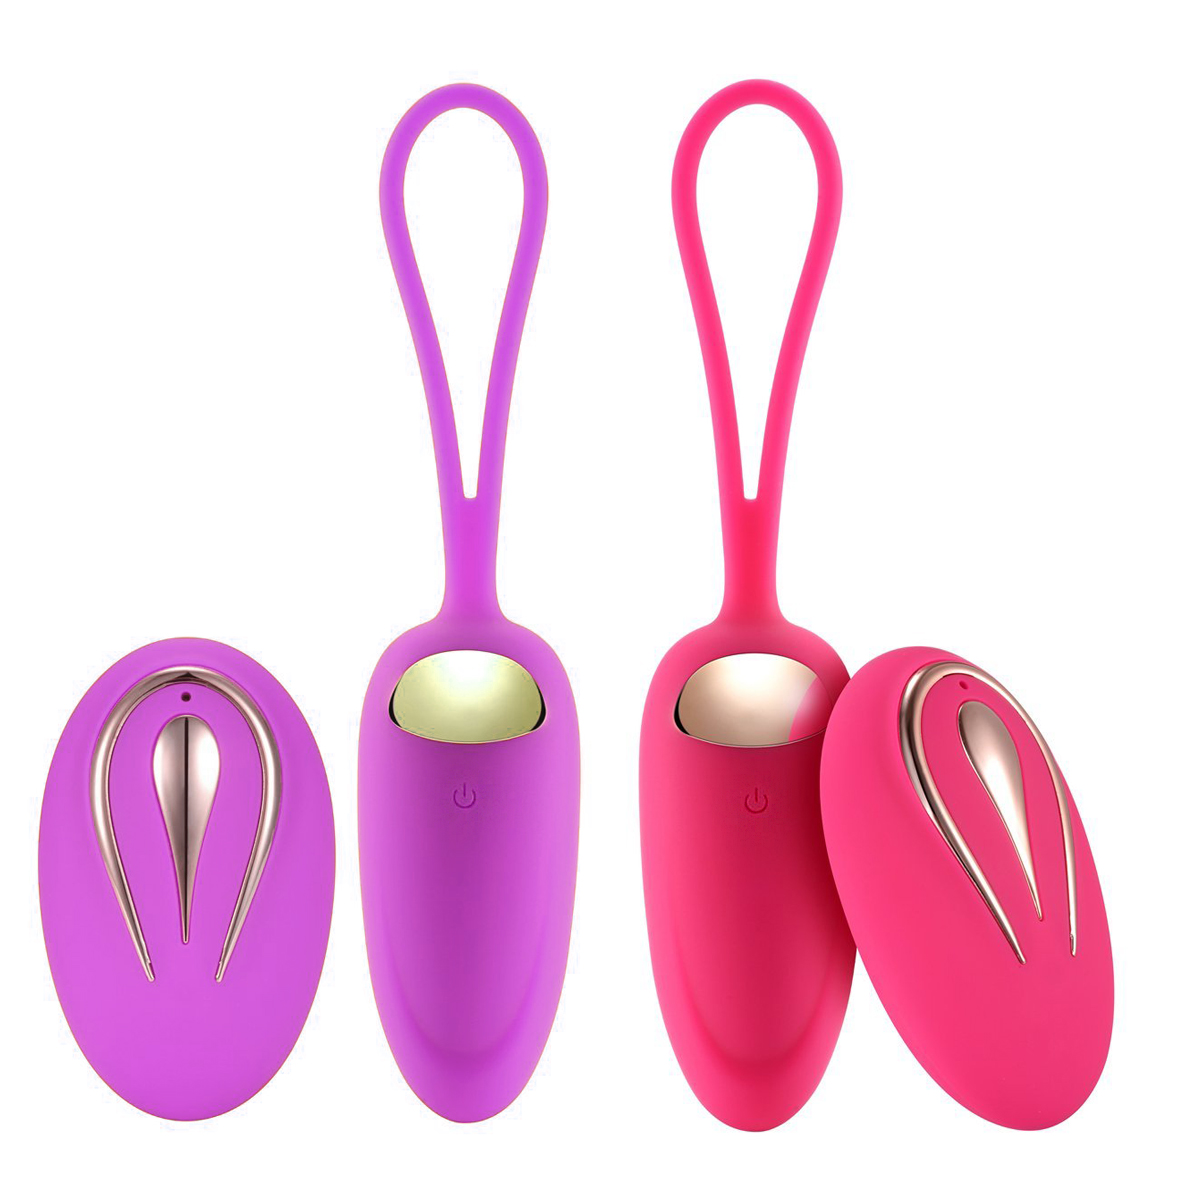 5pcs - 12 Modes Wireless Rechargeable Mermaid Vibrating Egg with Remote Control - Random Colour|GCAP018-Pink/Purple|UK seller